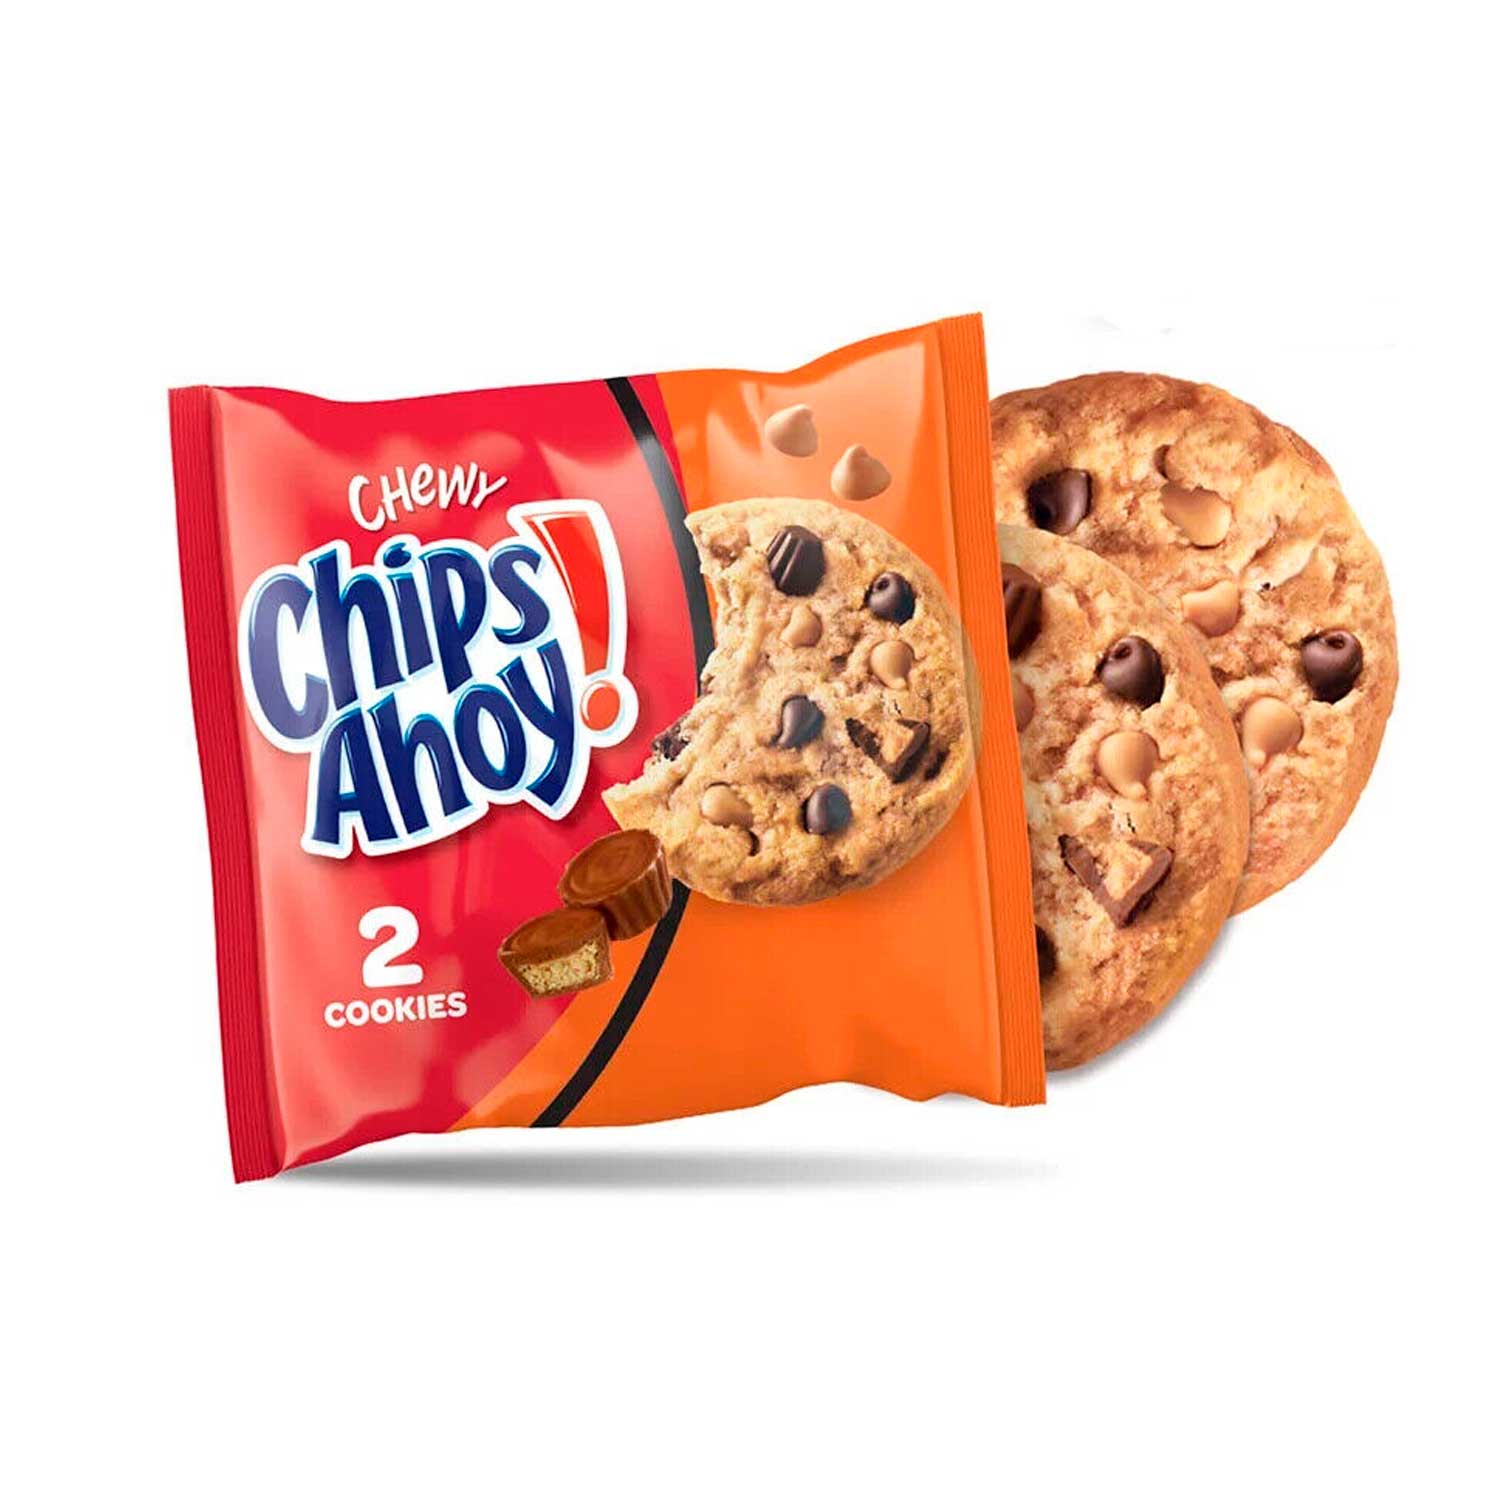 Galleta Chips Ahoy! Chewy con Reese's. 30 gr